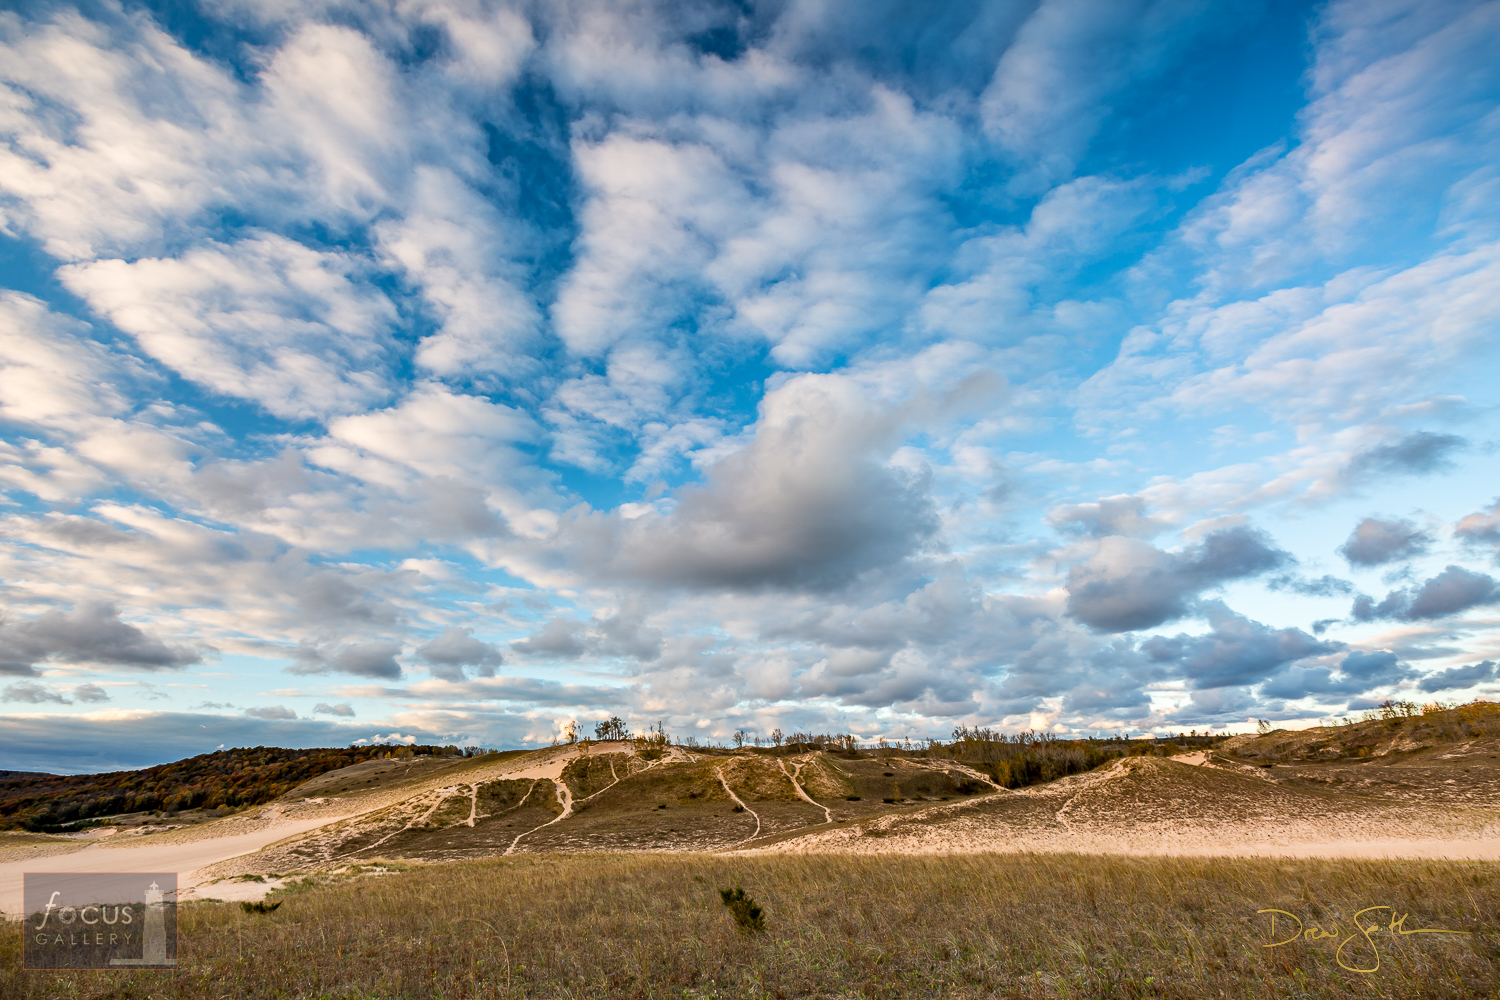 SLBE_Dune_Climb_dsmith_151018_5518-HDR Please use the "Email Focus Gallery" link below for information on available sizes and...